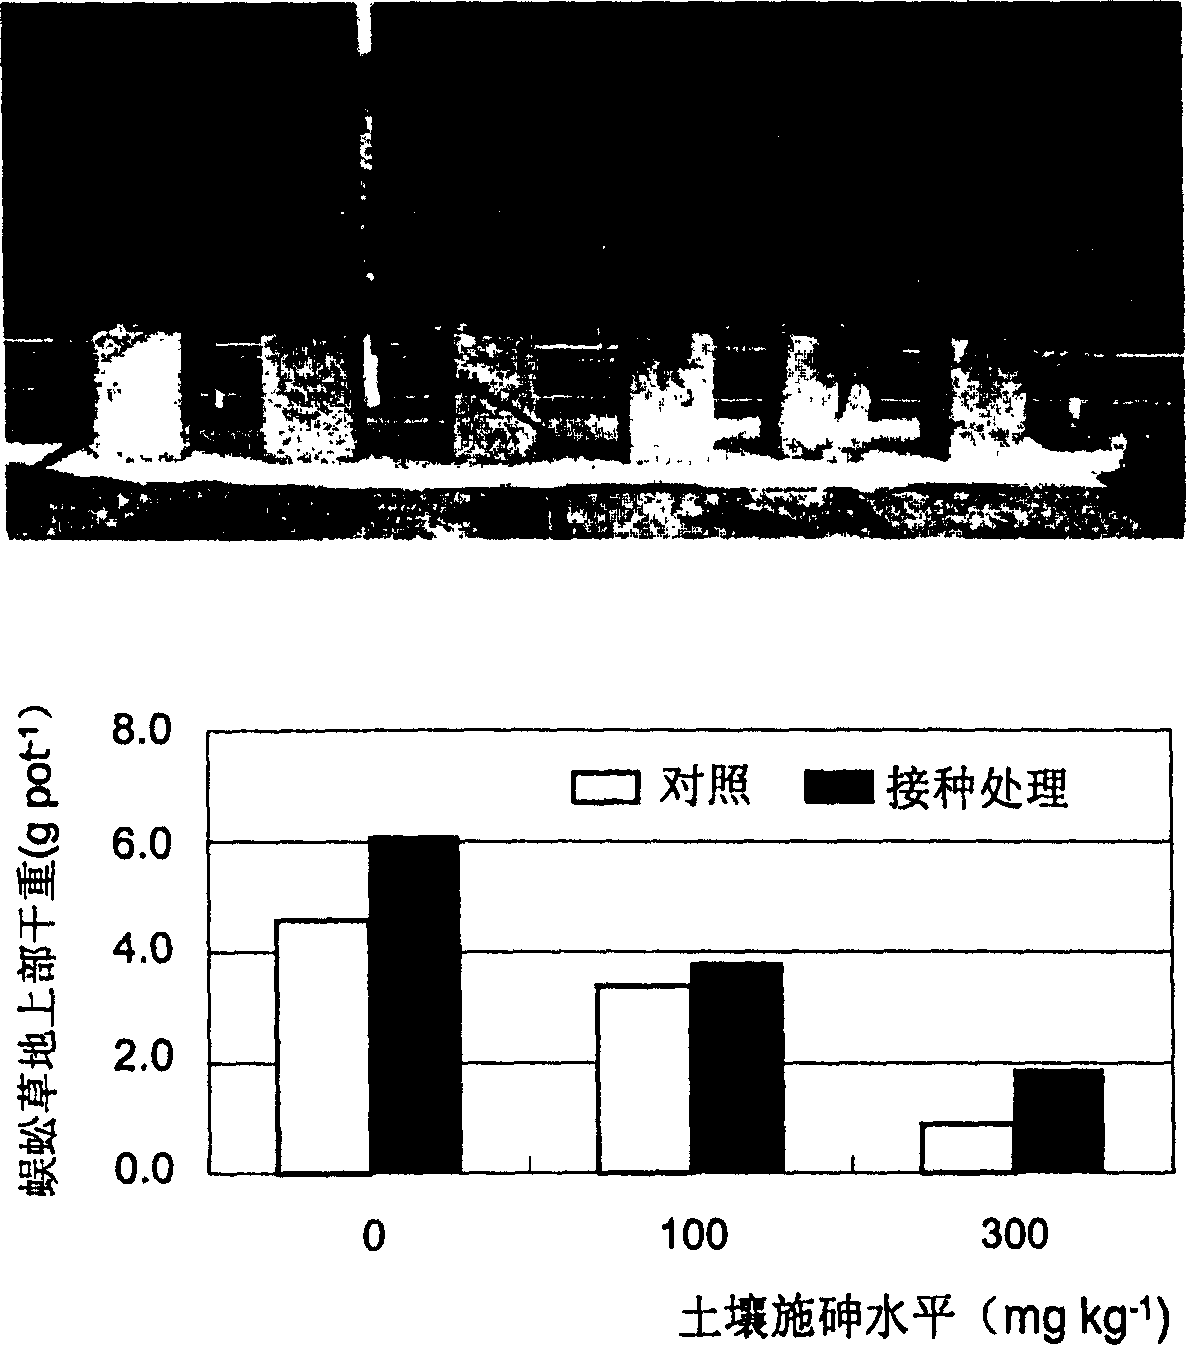 Method for promoting plant restoration efficiency of arsenic polluted soil